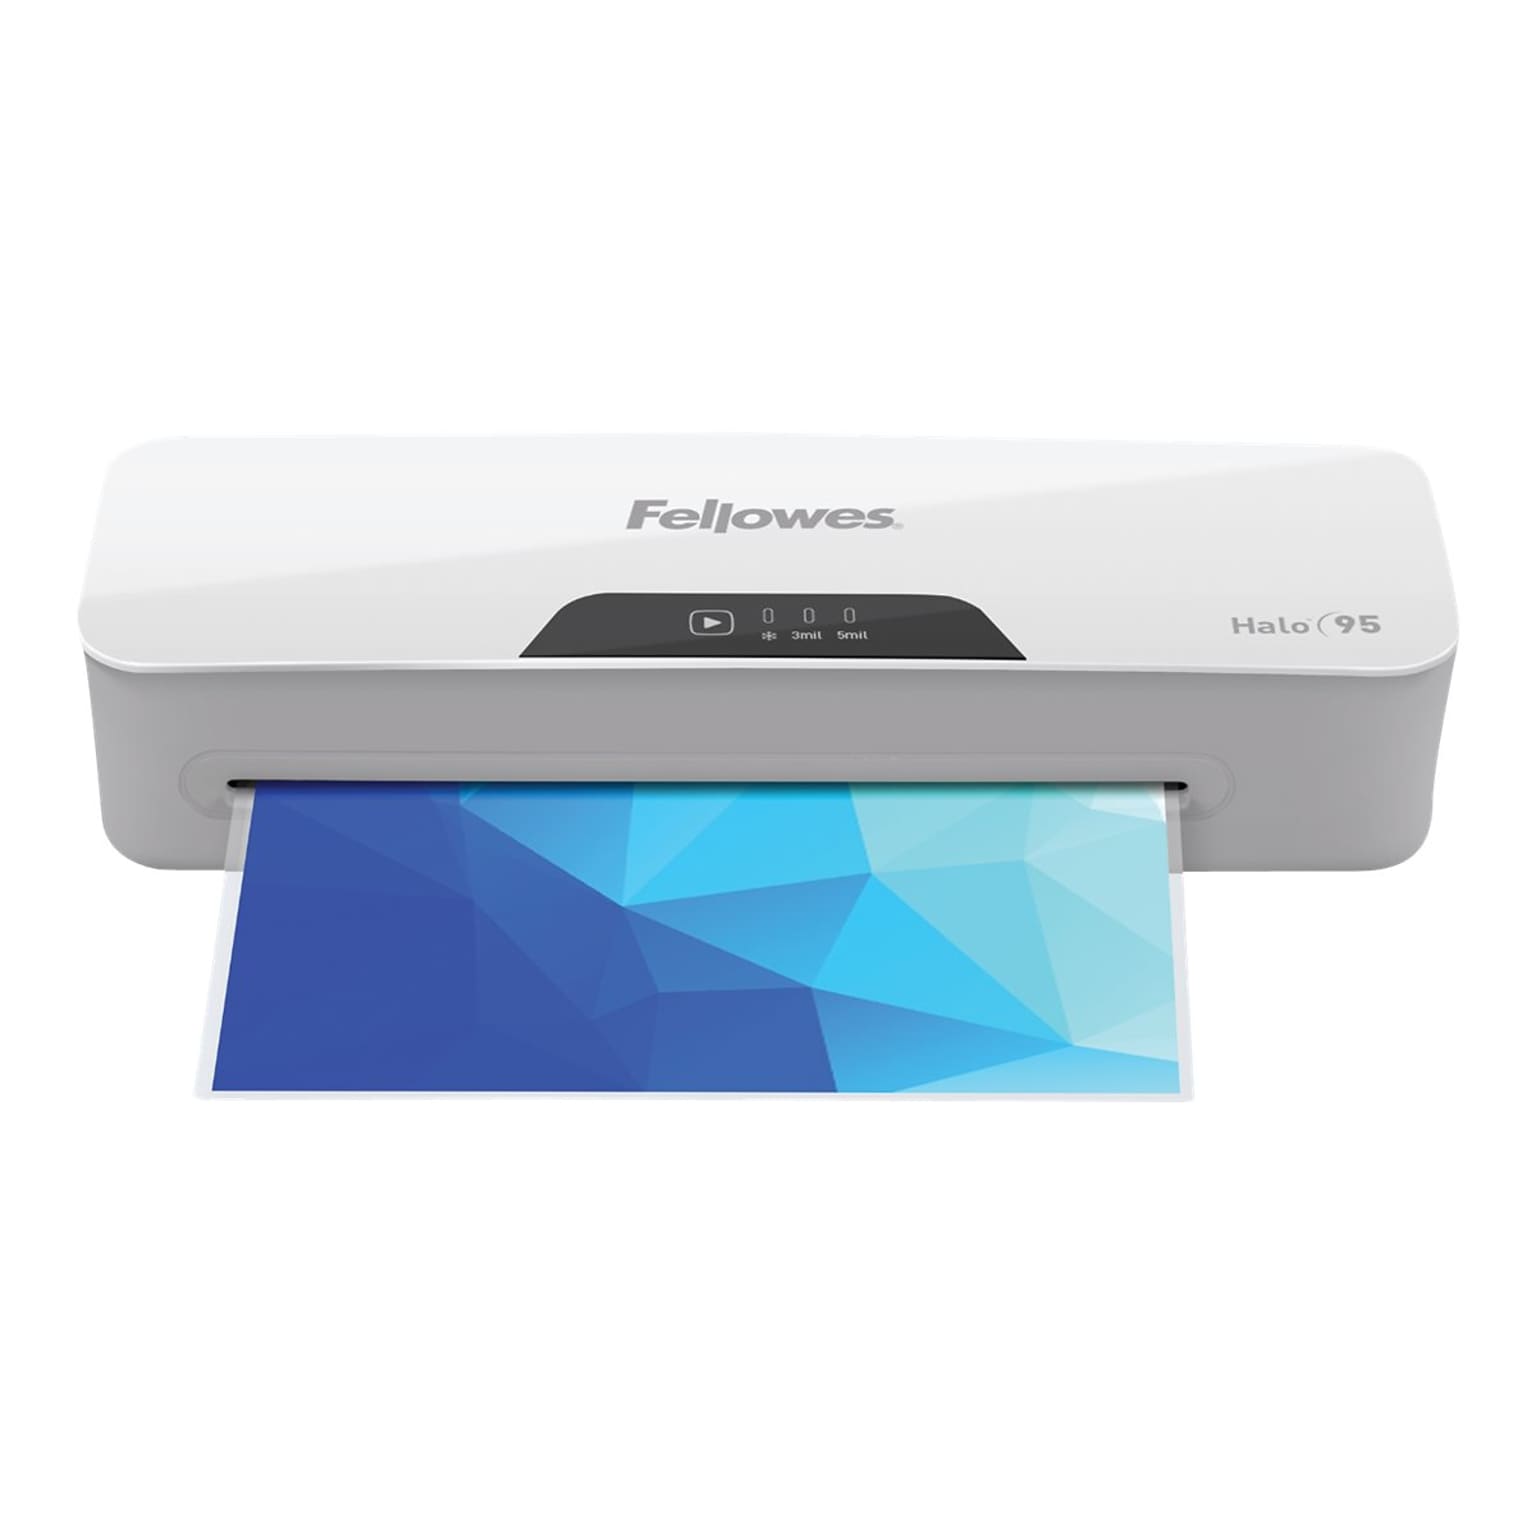 Fellowes Halo 95 Thermal & Cold Laminator, 9.5 Width, White/Light Gray (5753001)